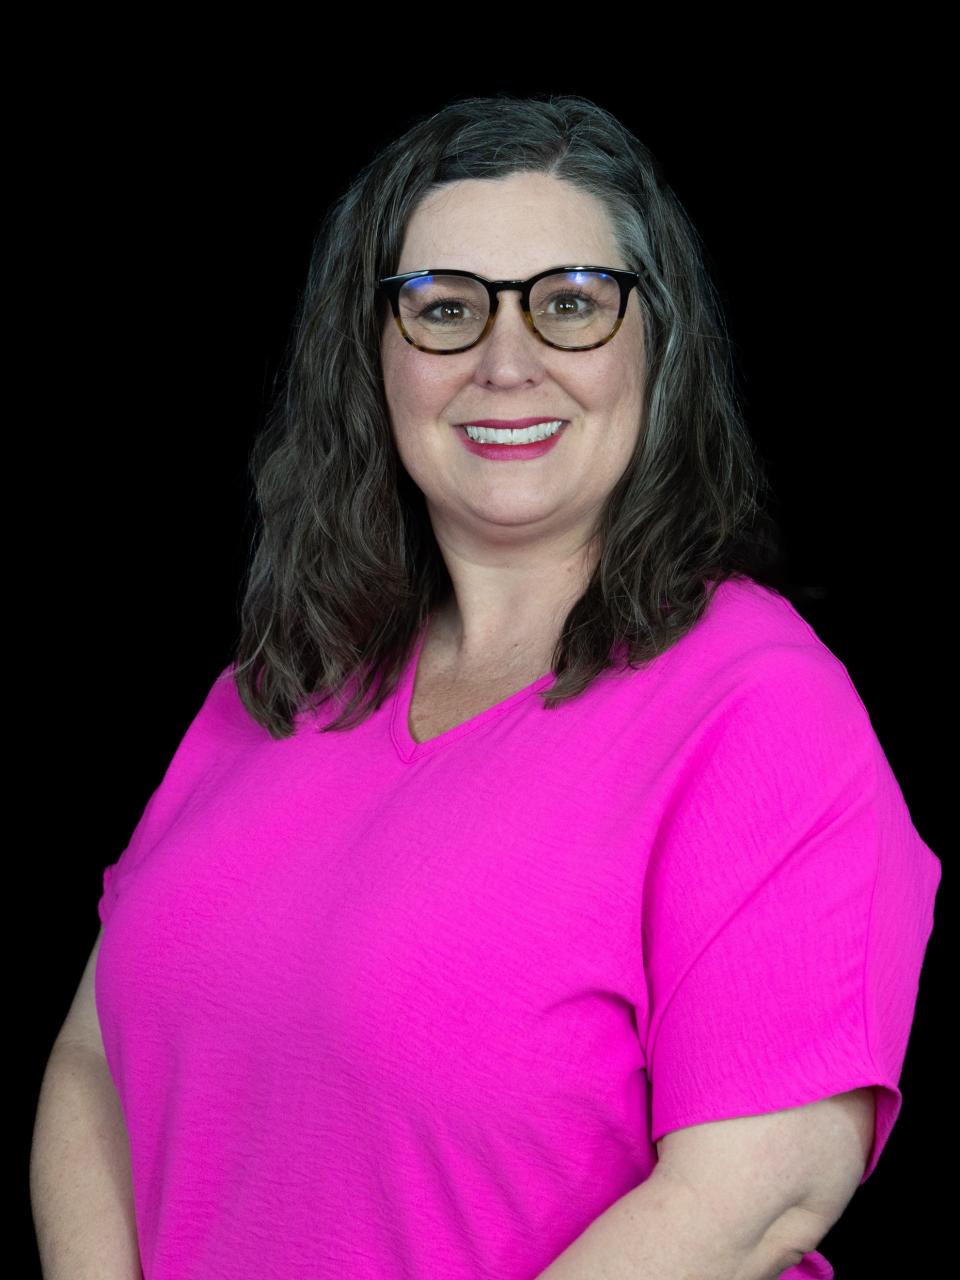 Abilene ISD announced Wednesday that Madison Middle School Assistant Principal Sherry Gumm was selected to be the principal of Bassetti Elementary School in the upcoming school year.